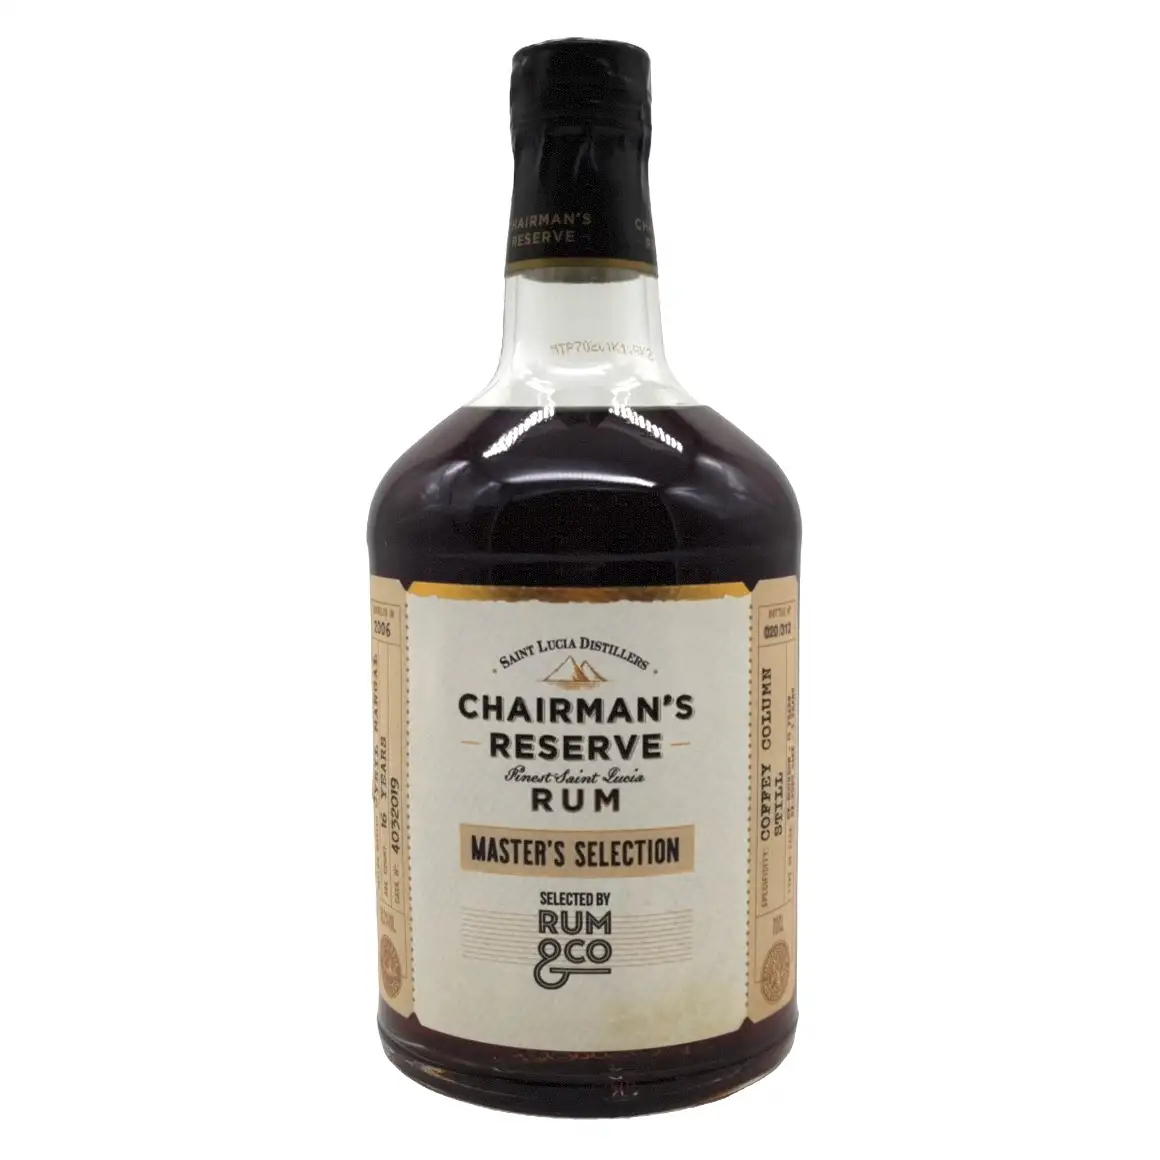 Image of the front of the bottle of the rum Chairman‘s Reserve Master‘s Selection (5. Rum & Co)